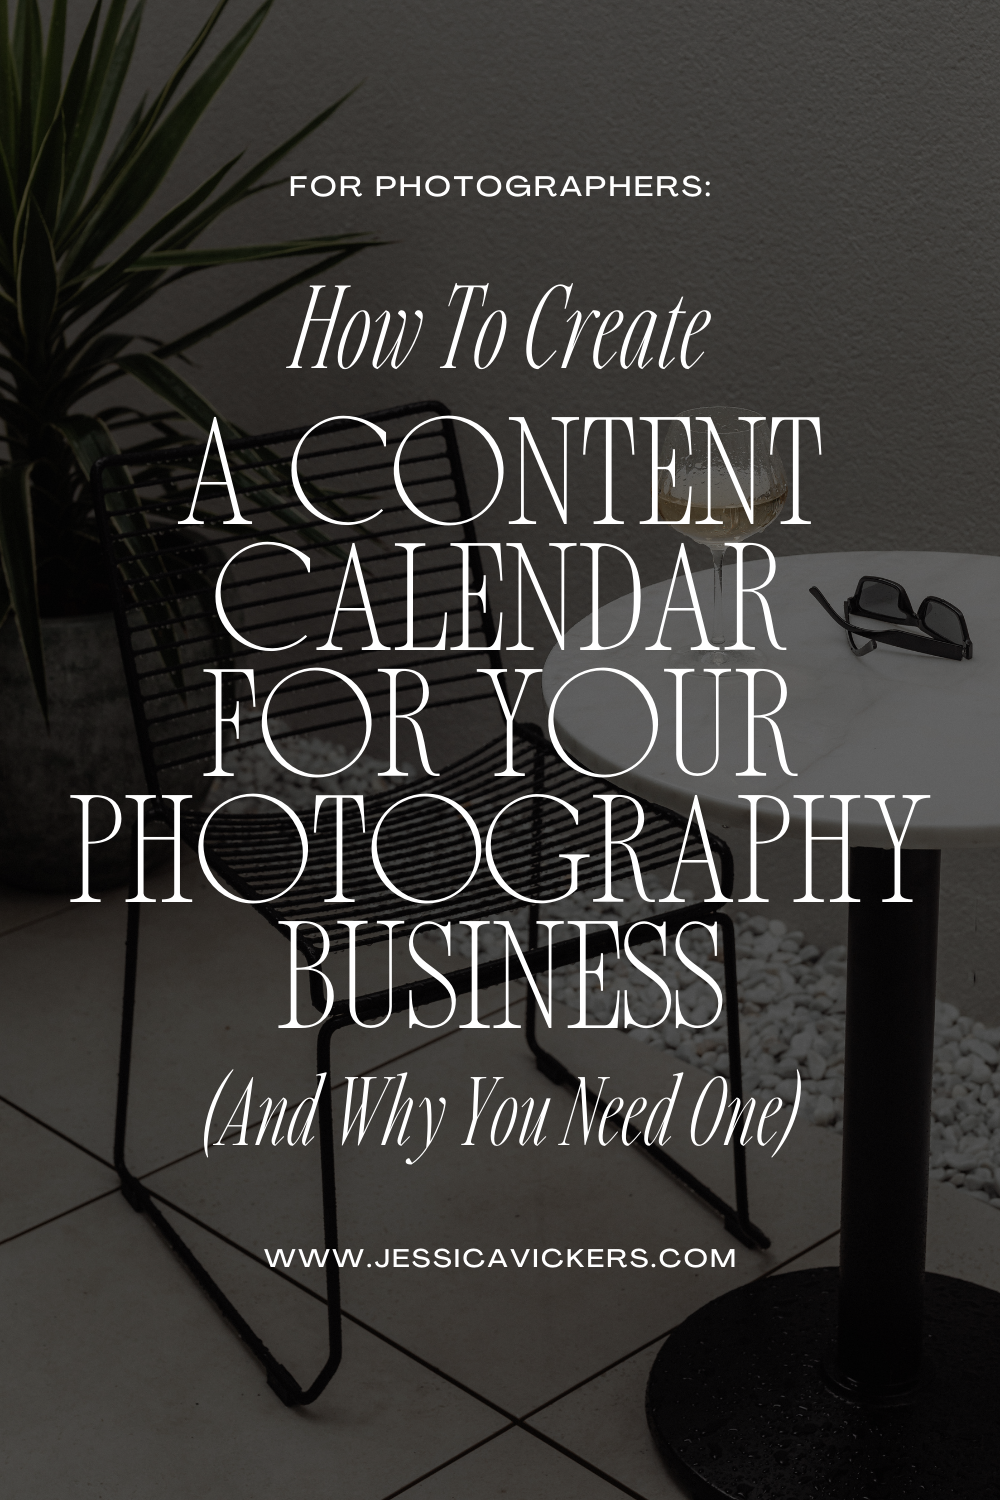 how to create a content calendar for your photography business jessicavickers.com